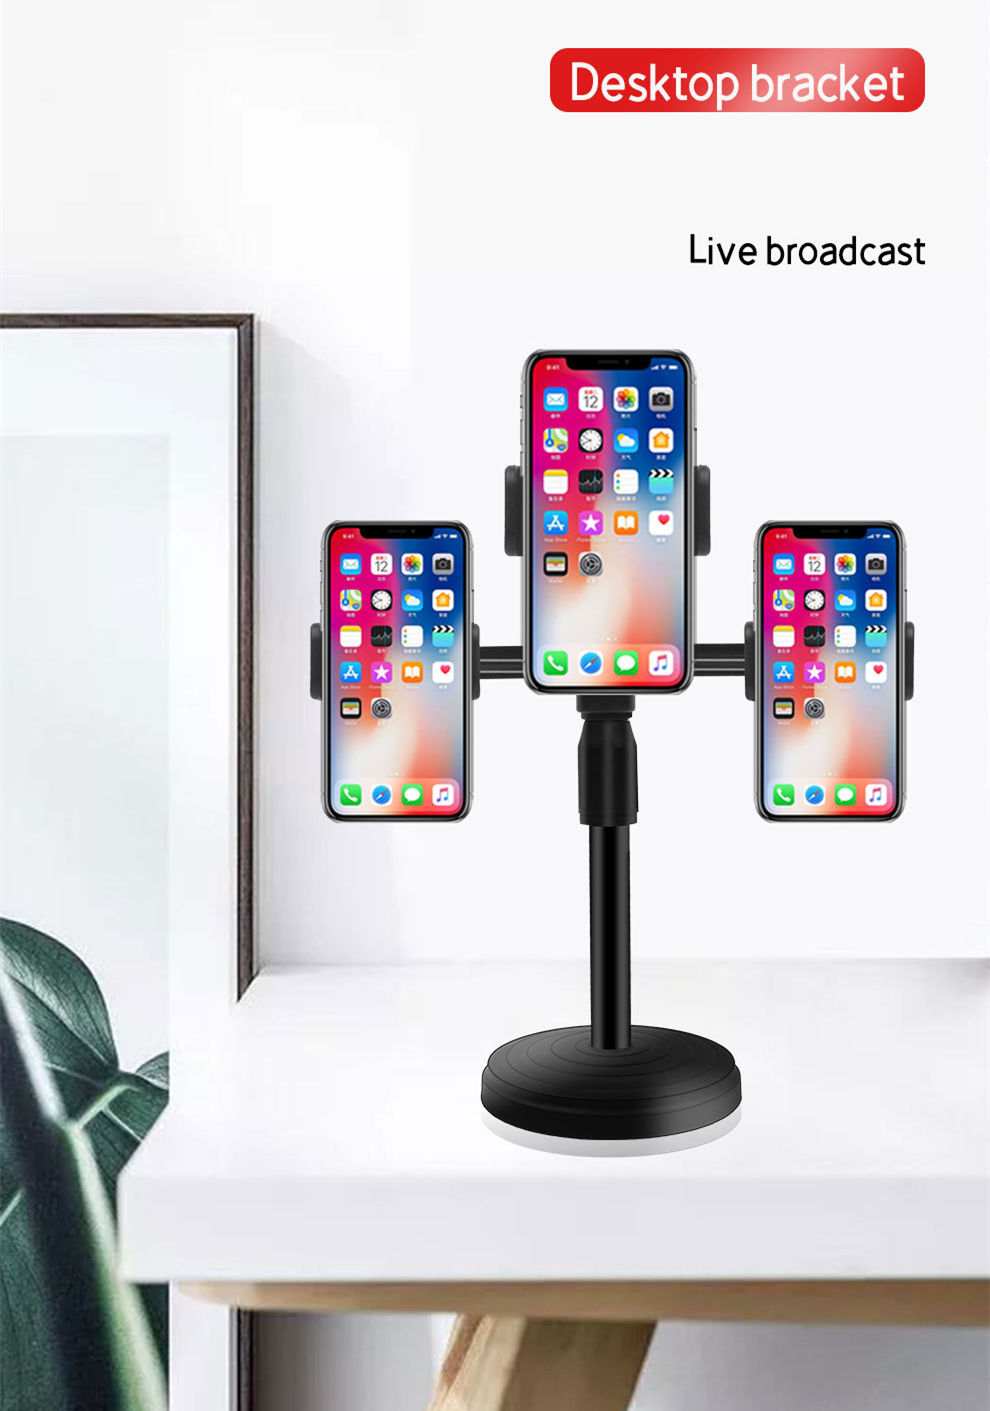 Bakeey-PC-10-Universal-Live-Broadcast-Foldable-Adjustable-Height-Stand-Holder-for-Mobile-Phone-Table-1803617-1